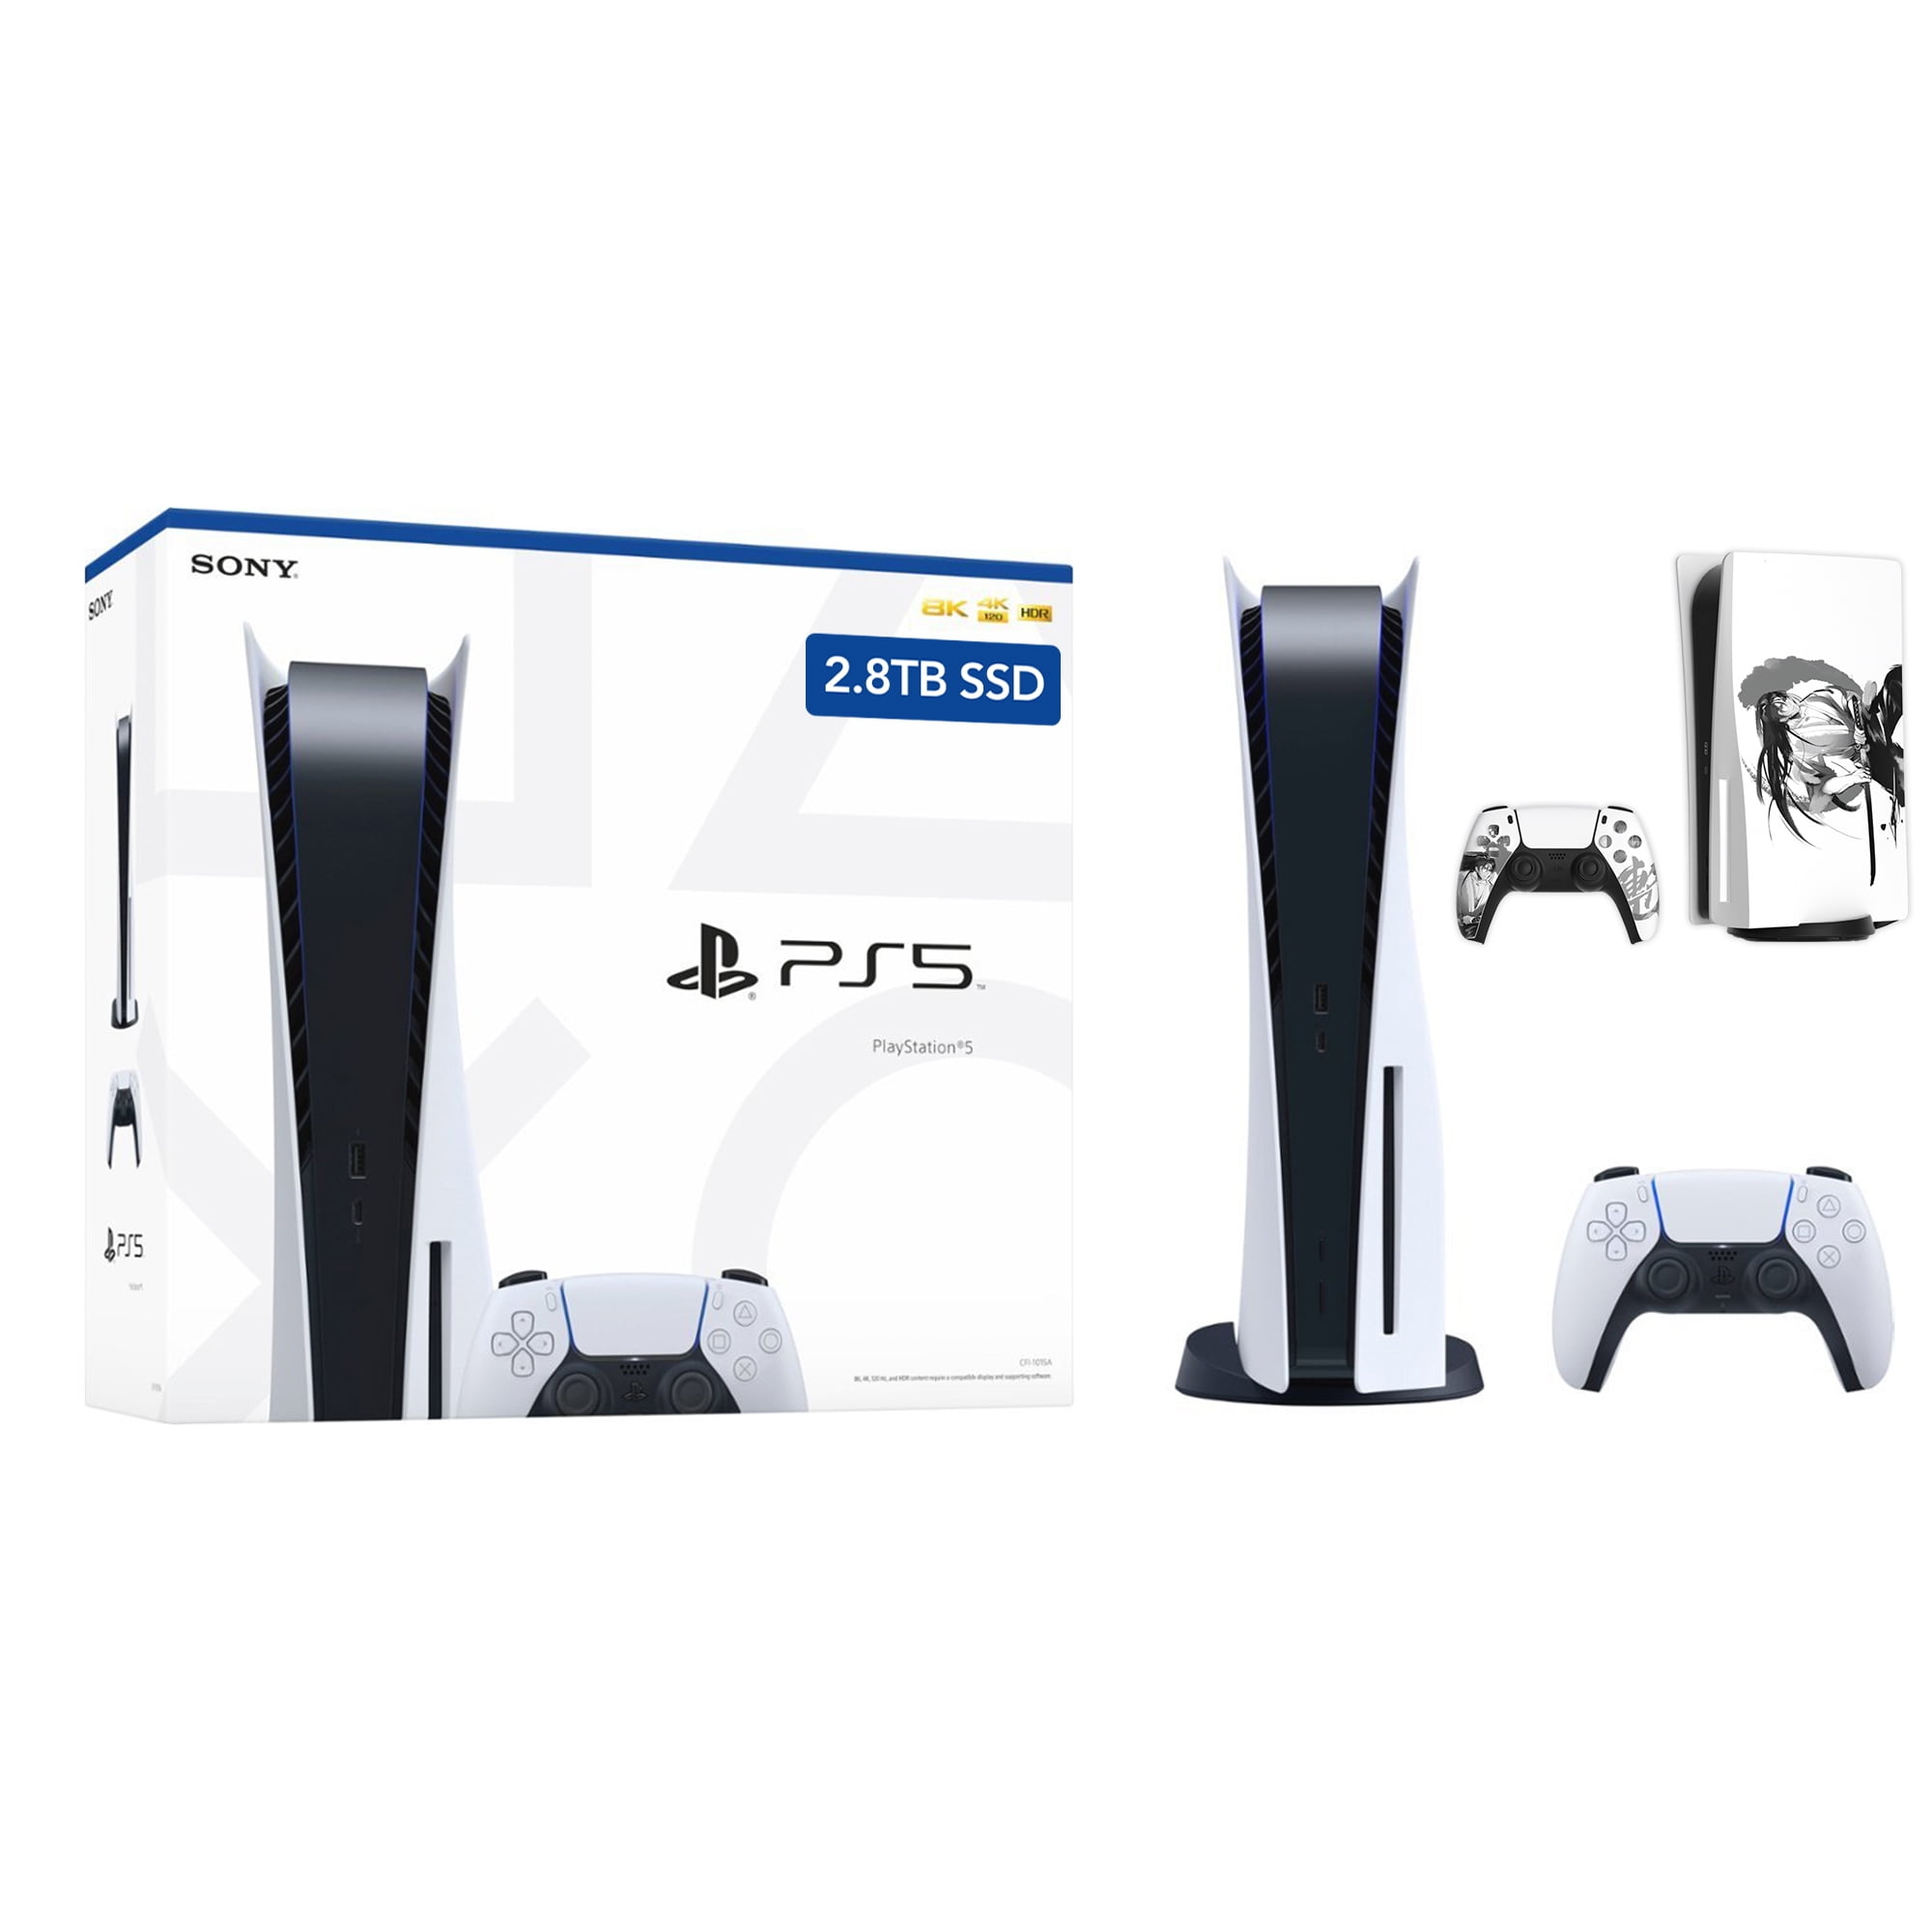 PlayStation 5 Disc 2.8TB Upgraded SSD PS5 Gaming Console, Mytrix Full Body  Skin Sticker, Samurai - PS5 Disc Version JP Region Free 